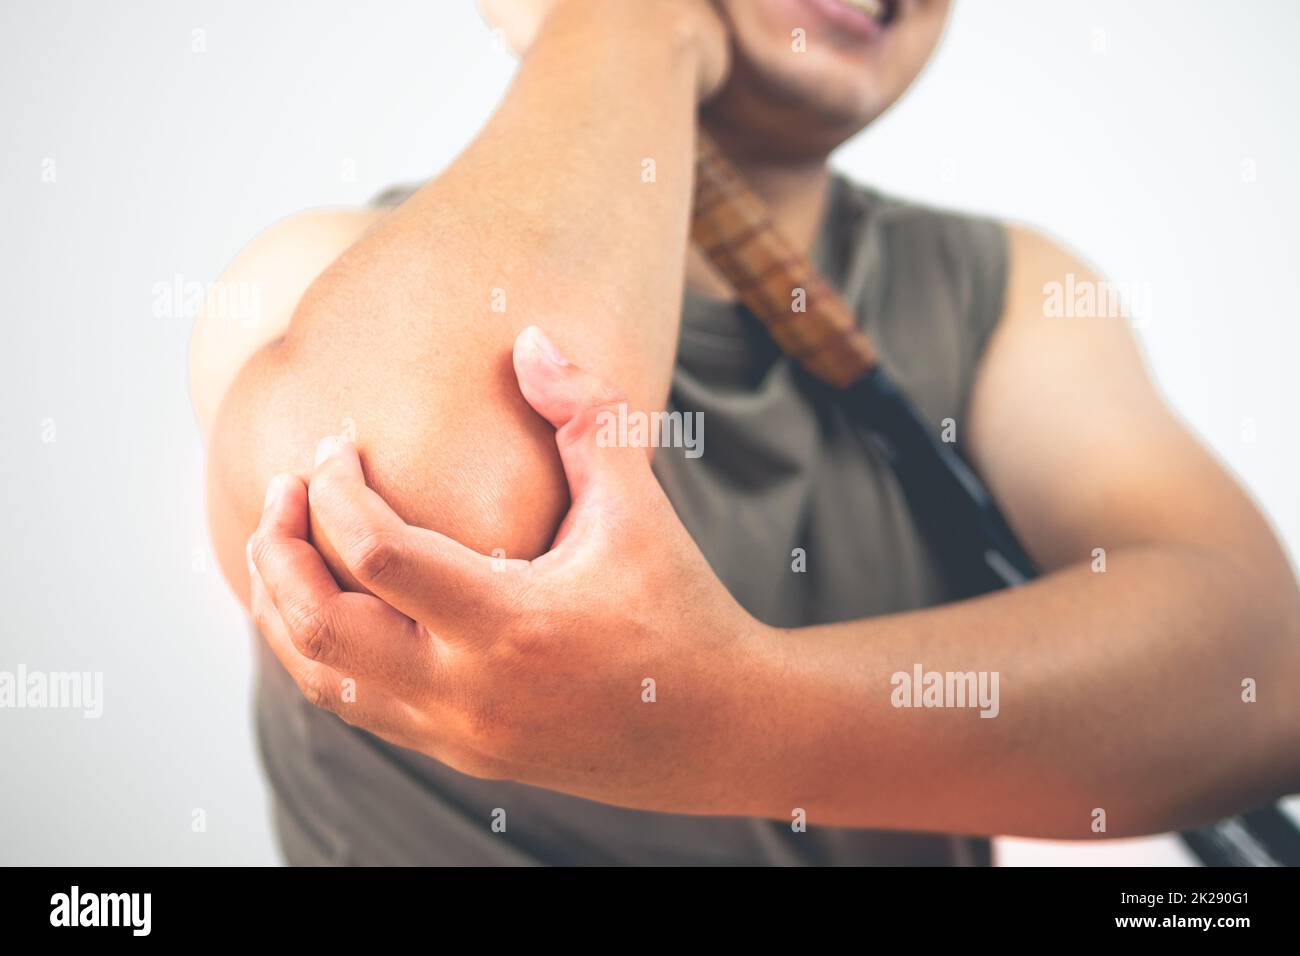 Tennis elbow injury concept. The man holds racket. Symptom area is shown with red color. Healthcare knowledge. Medium close up shot. Stock Photo